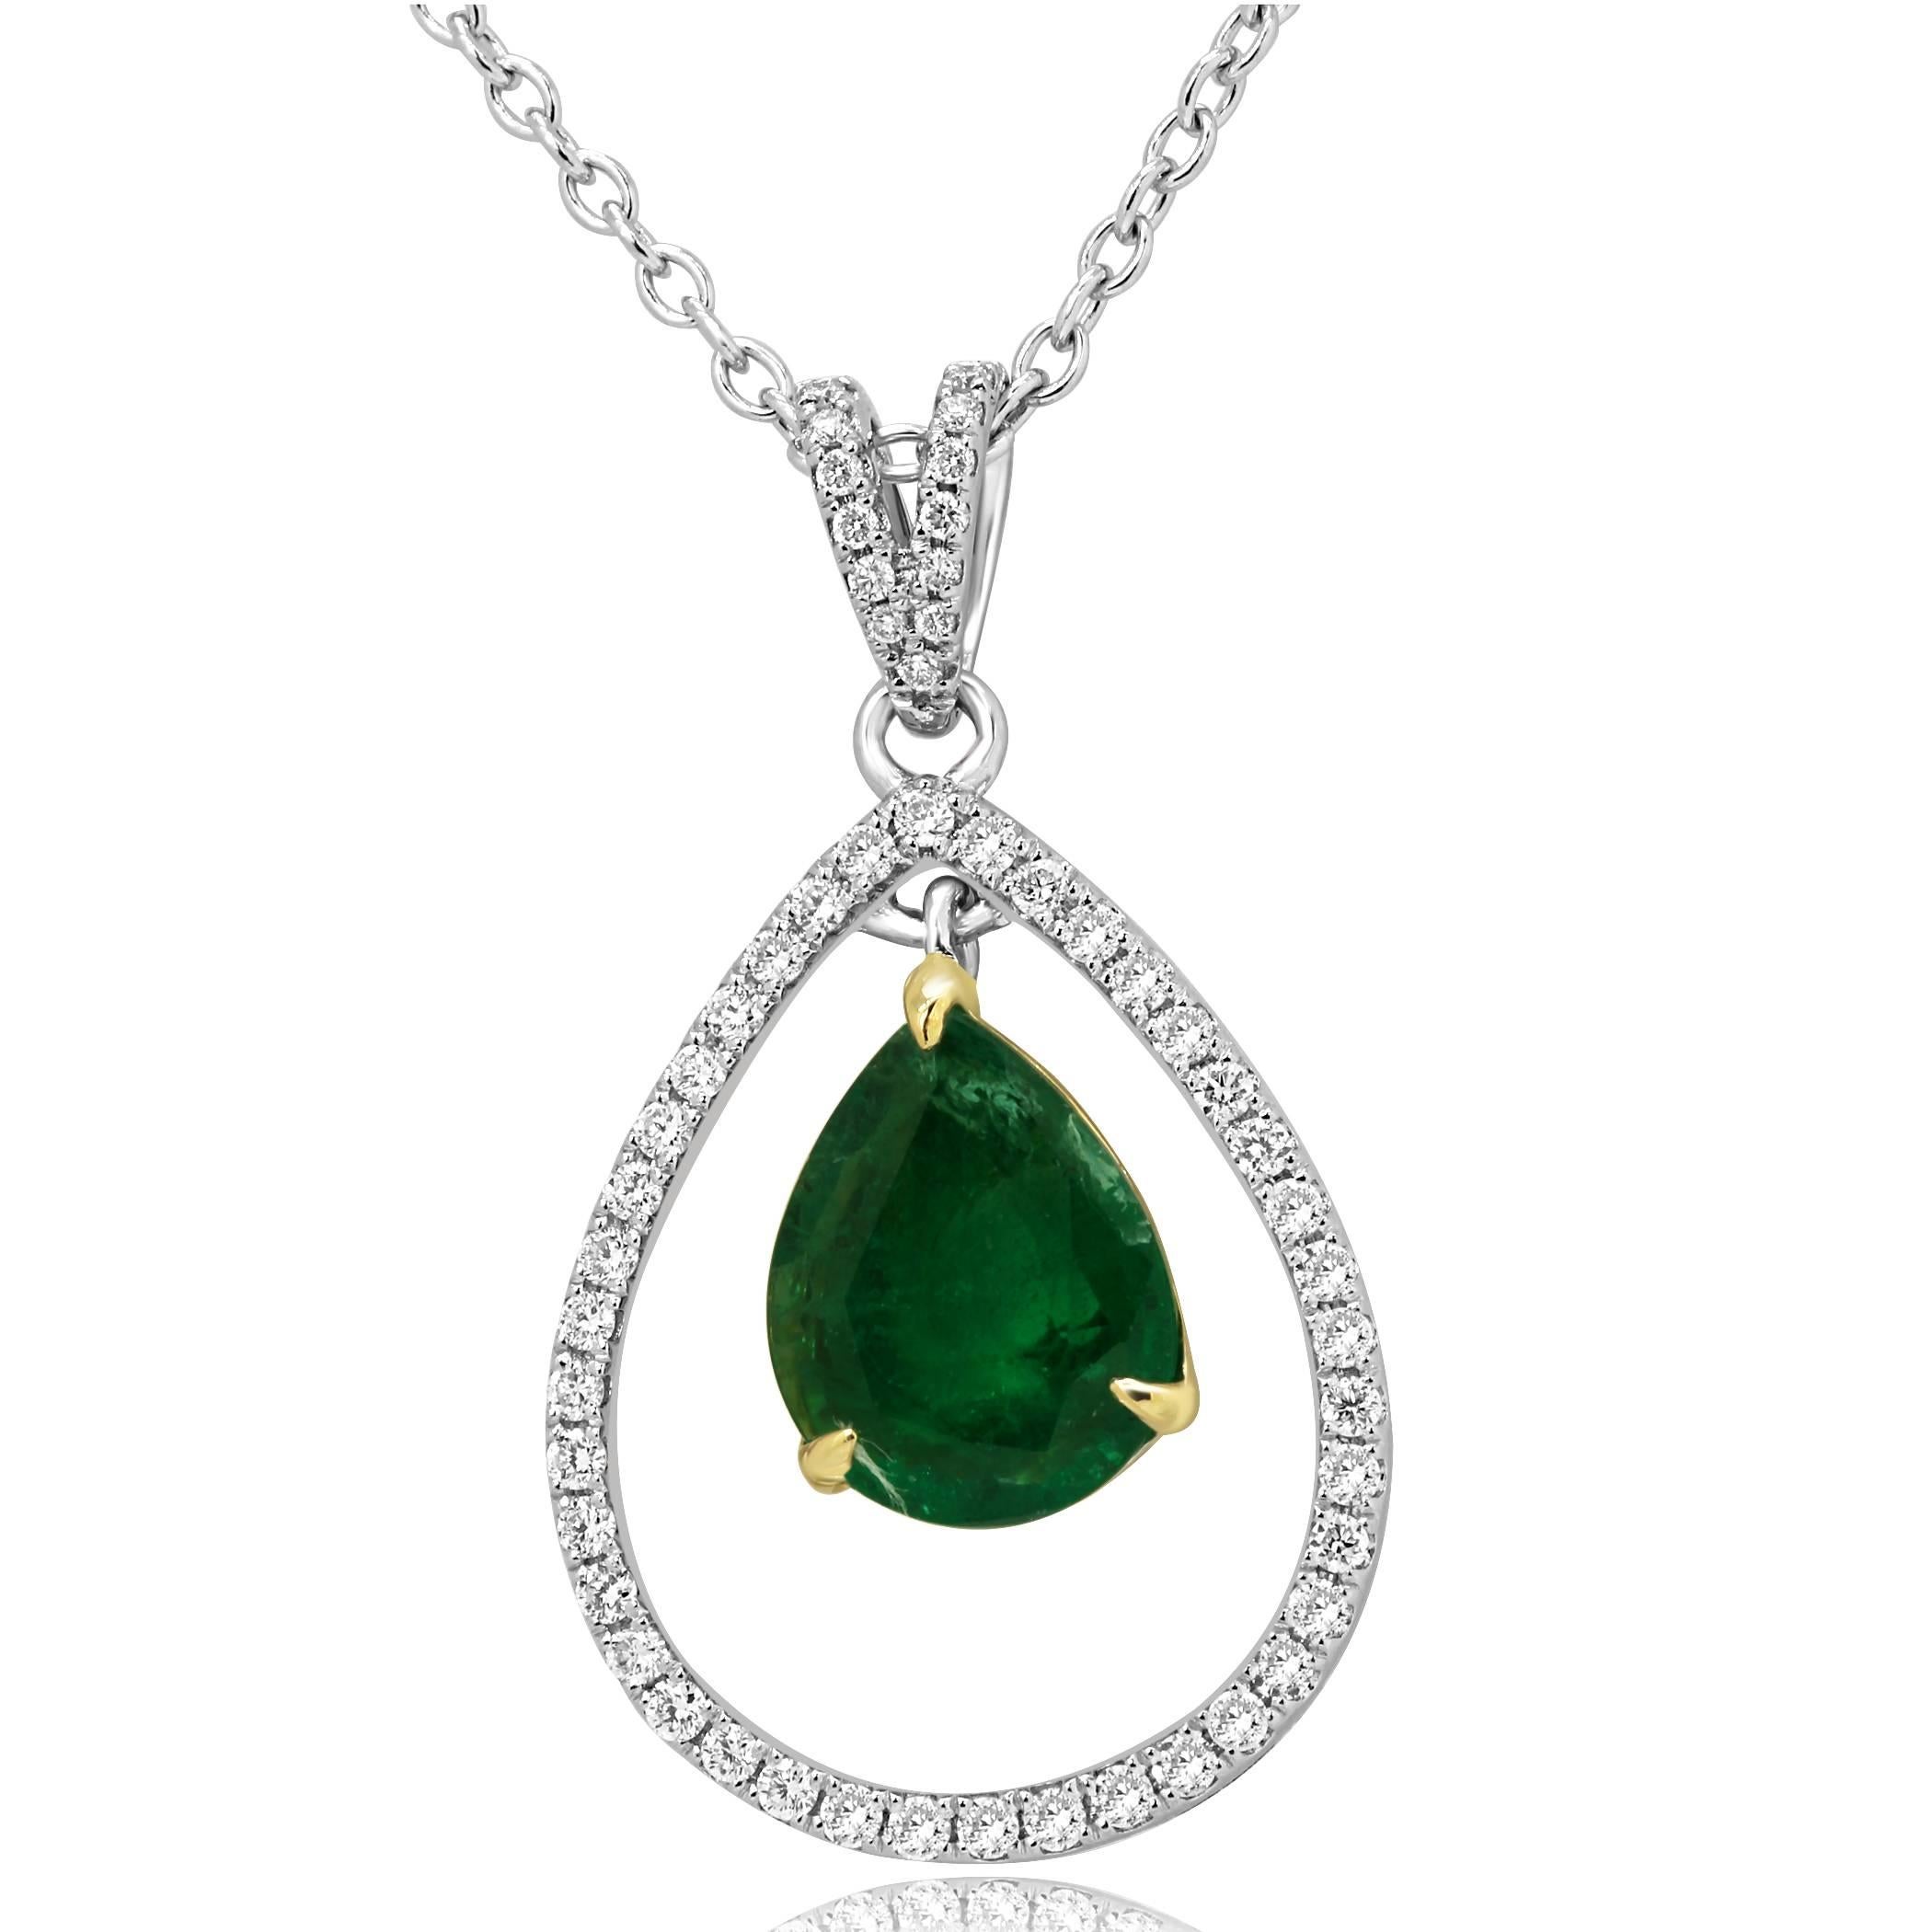 Stunning Emerald Pear shape 1.89 Carat encircled in a halo of White Round Diamonds 0.37 Carat in 14K White and Yellow Gold Chain Necklace.

Total Stone Weight 2.26 Carat